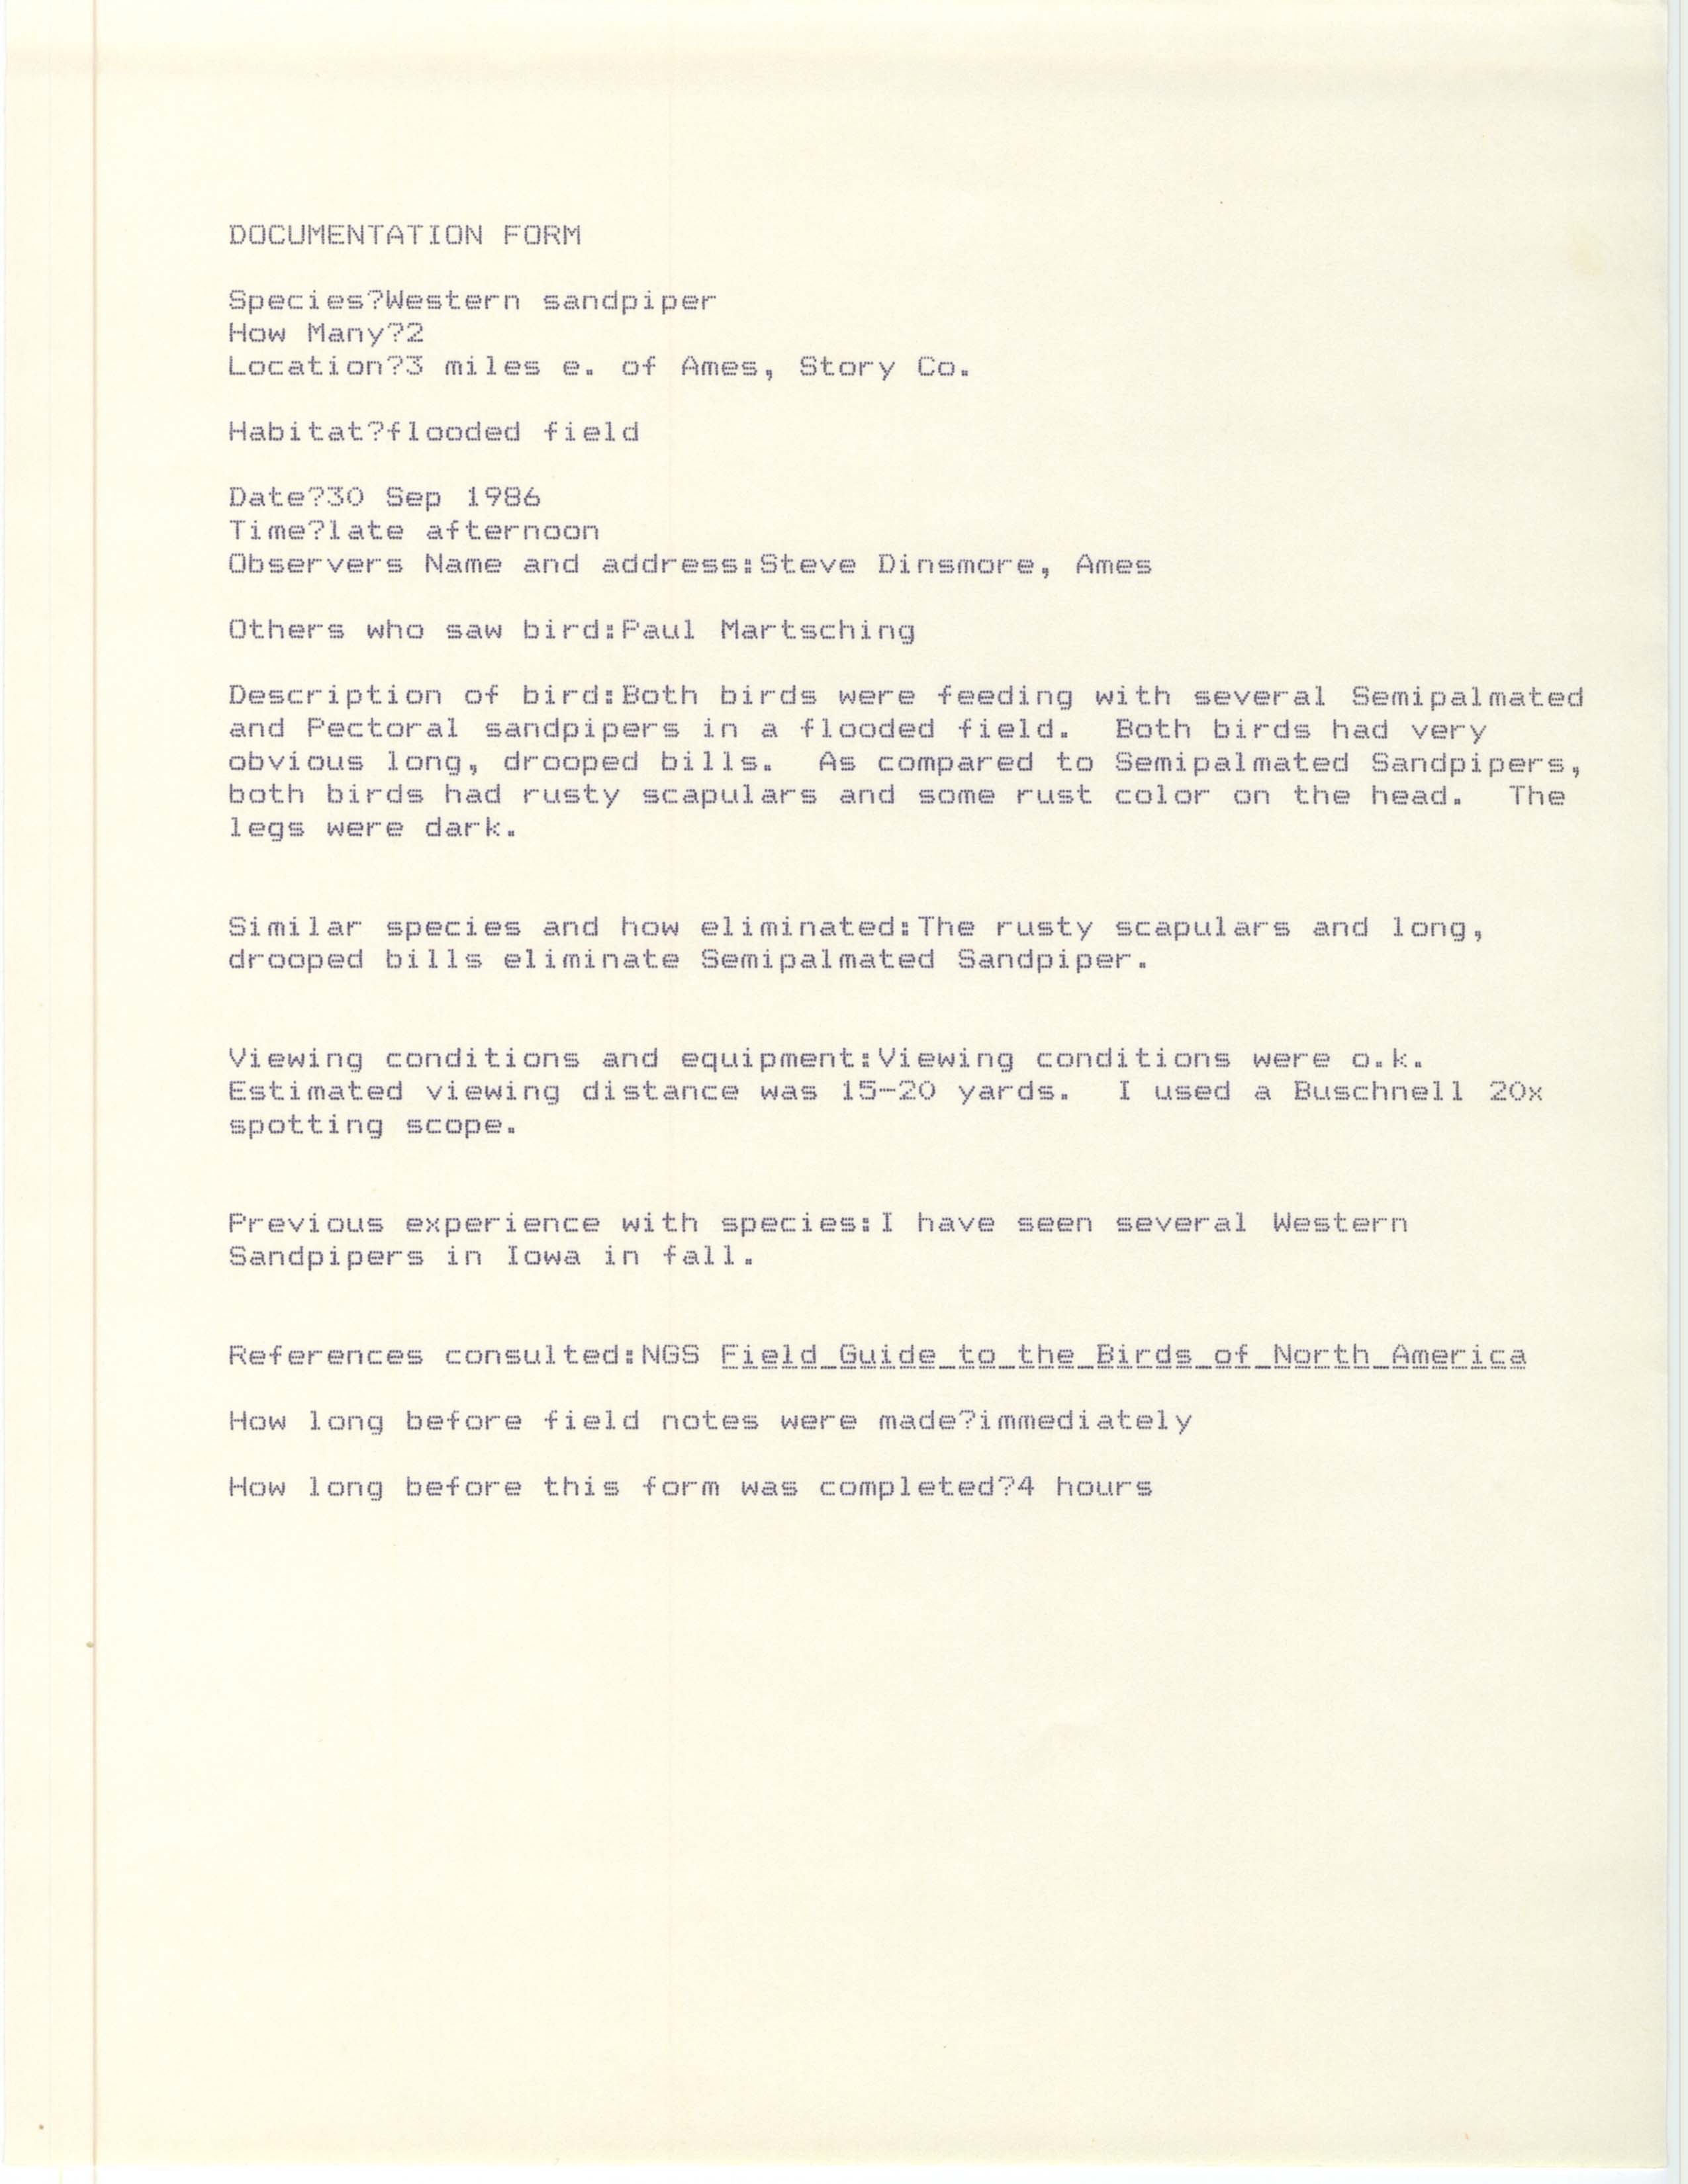 Rare bird documentation form for Western Sandpiper at east of Ames, 1986